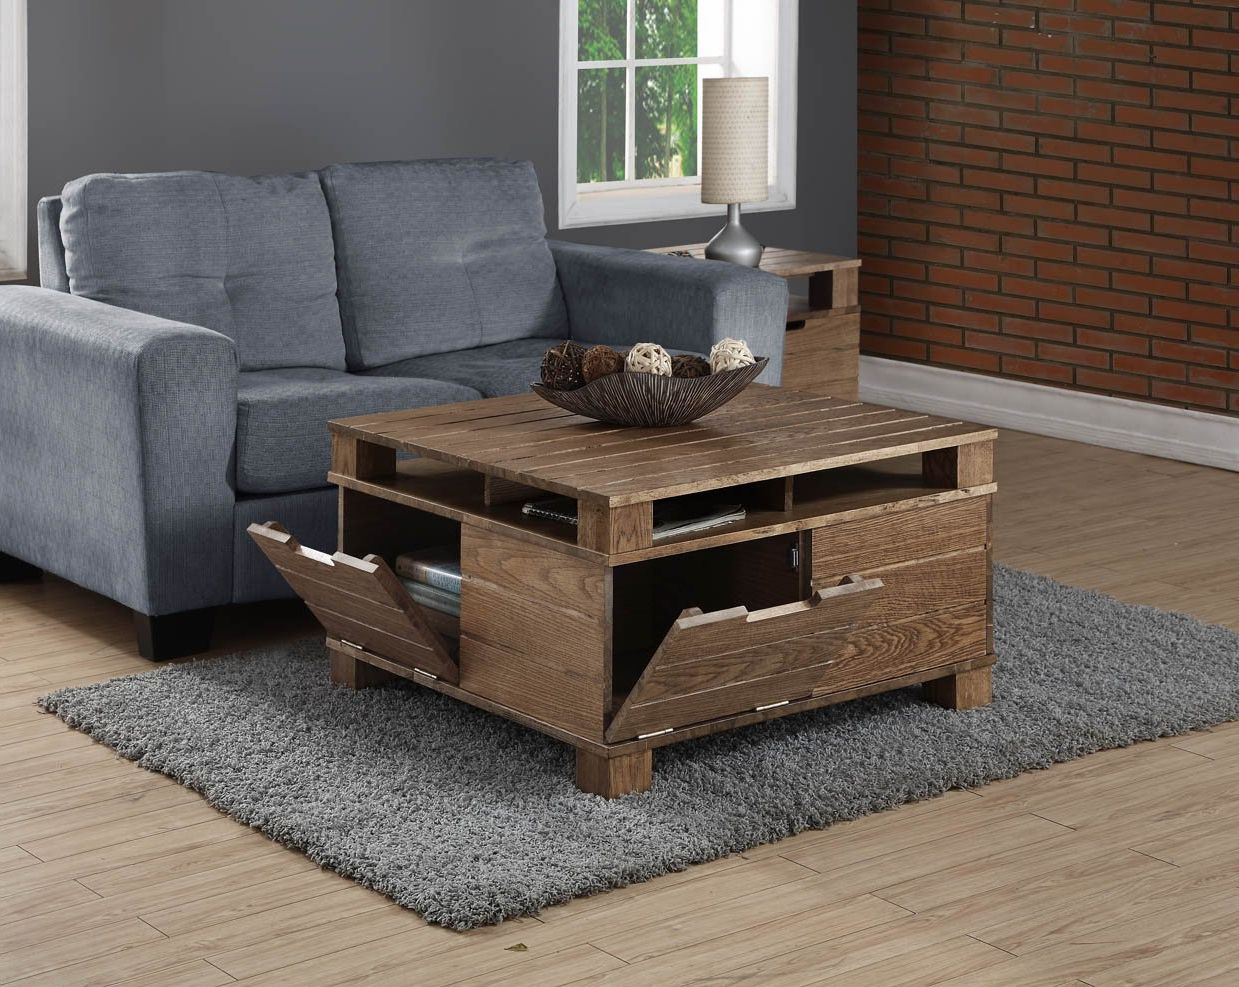 Jual Rustic Oak Solid Wood Coffee Table At Barnitts Online Within Widely Used Wood Coffee Tables (View 3 of 20)